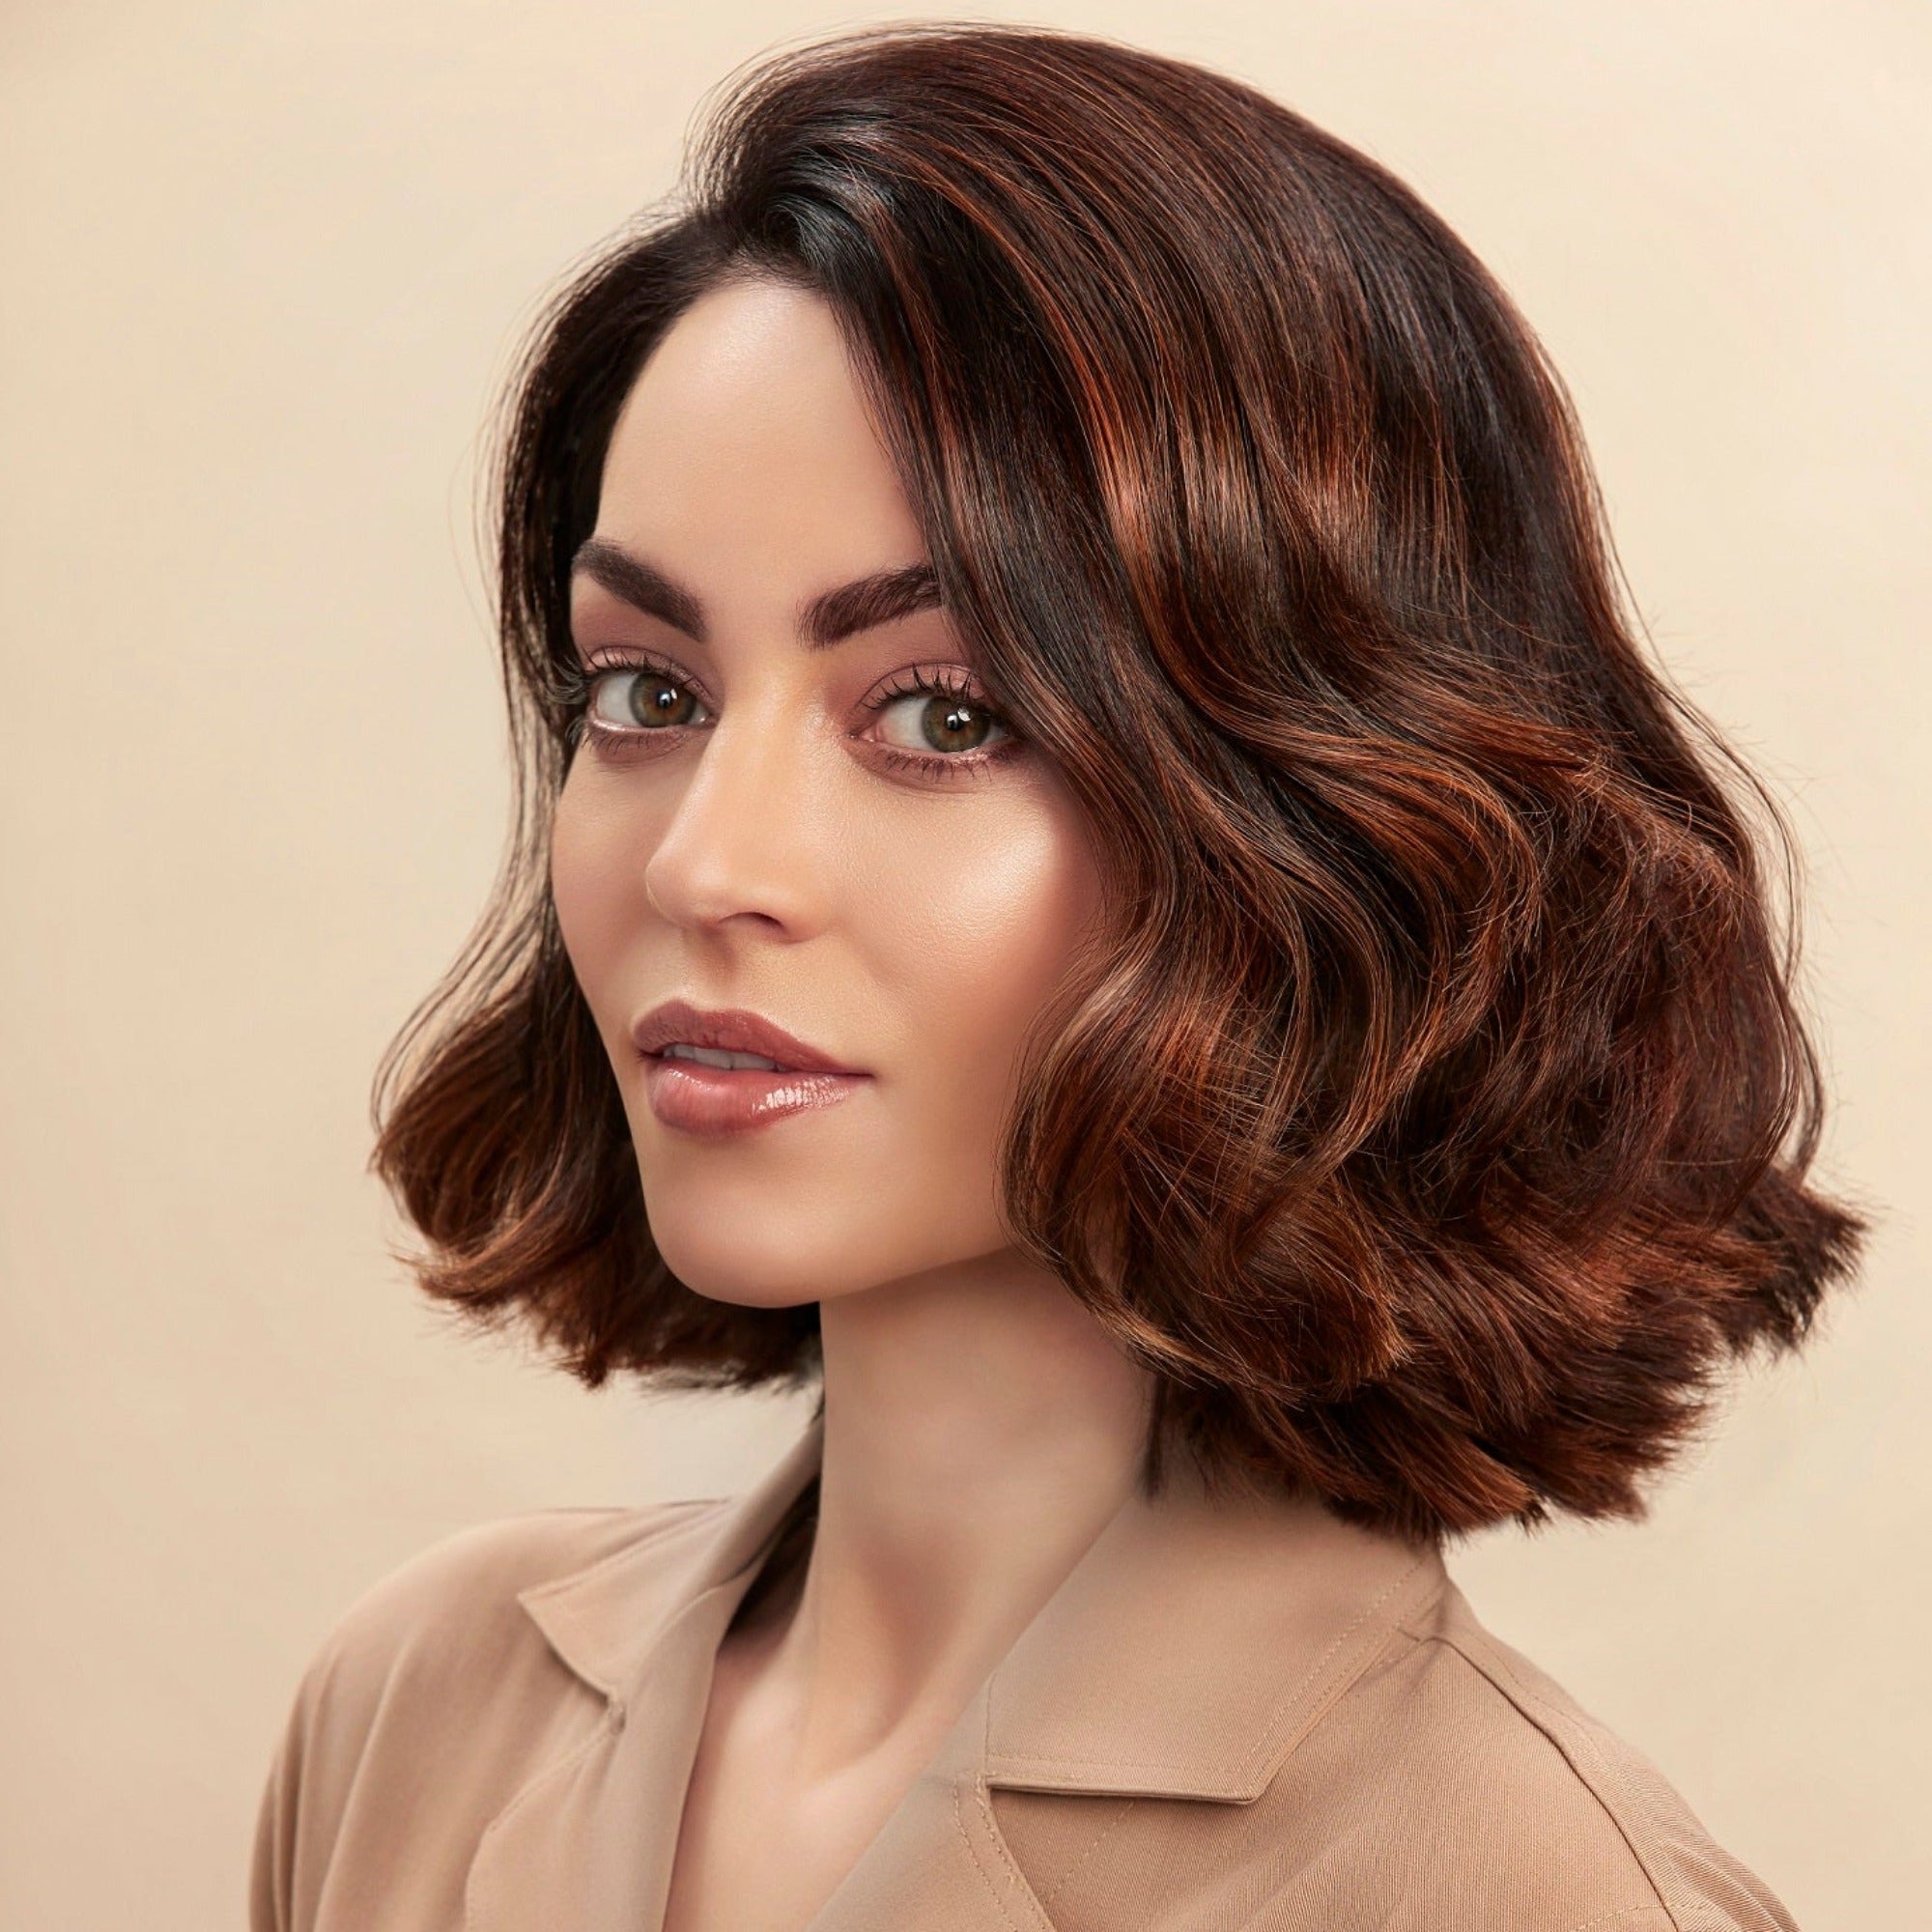 Female model with a wavy bob and brunette hair. She has super shiny hair with lots of volume. She is looking at the camera from a side angle and is wearing a neutral coloured shirt.